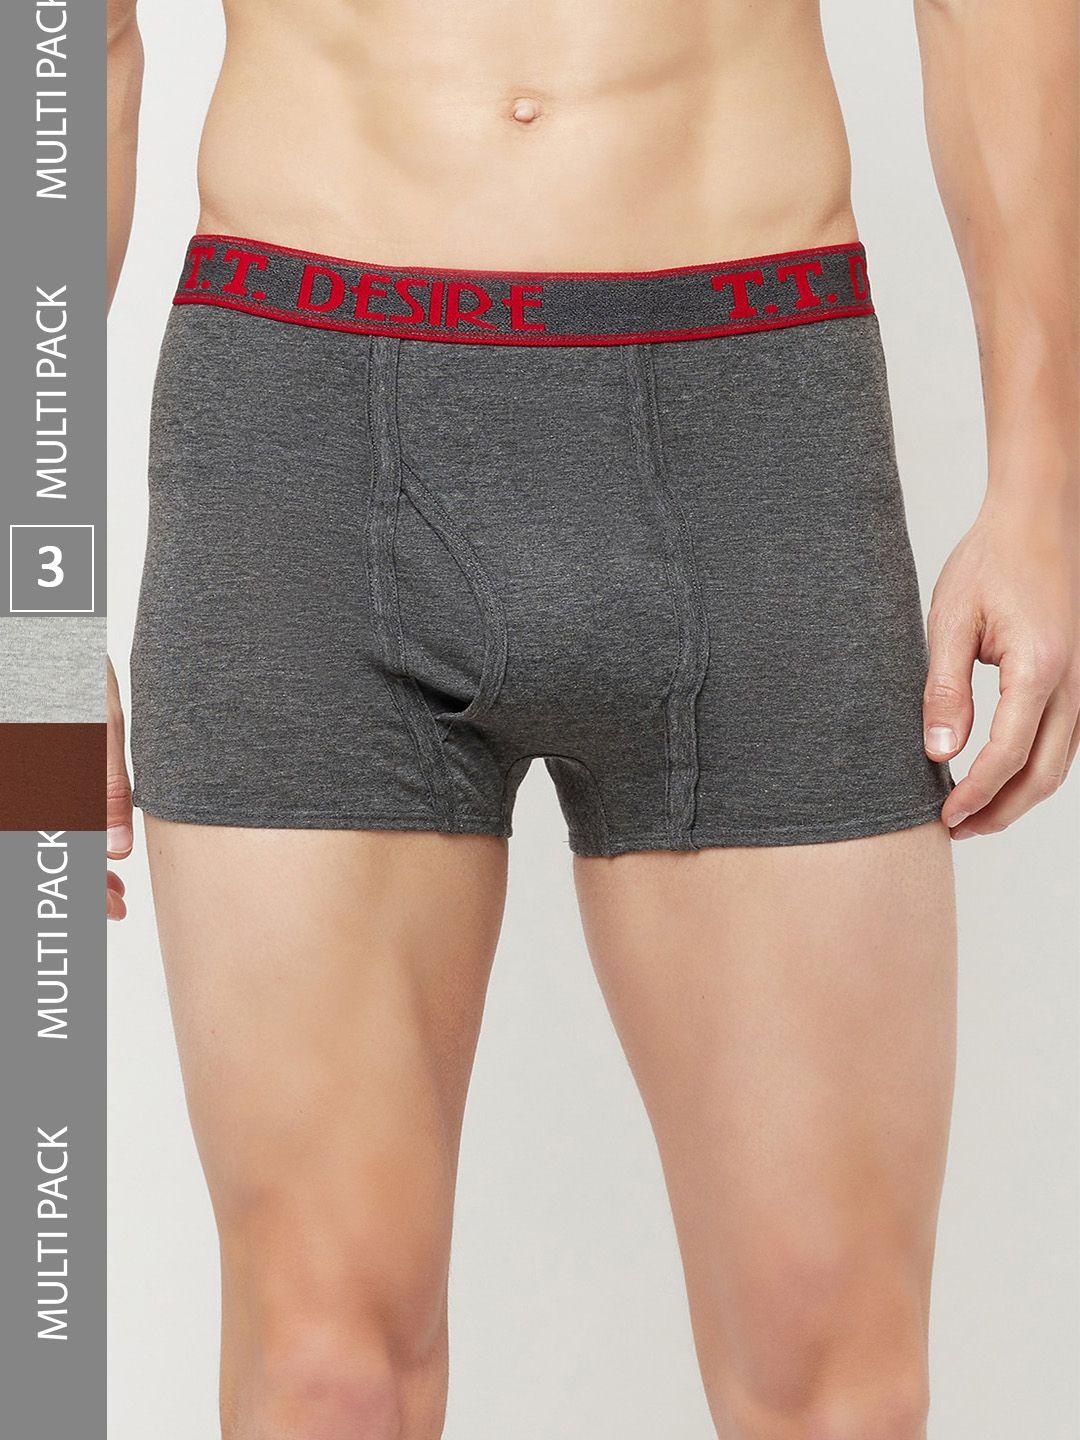 t.t. pack of 3 cotton trunks